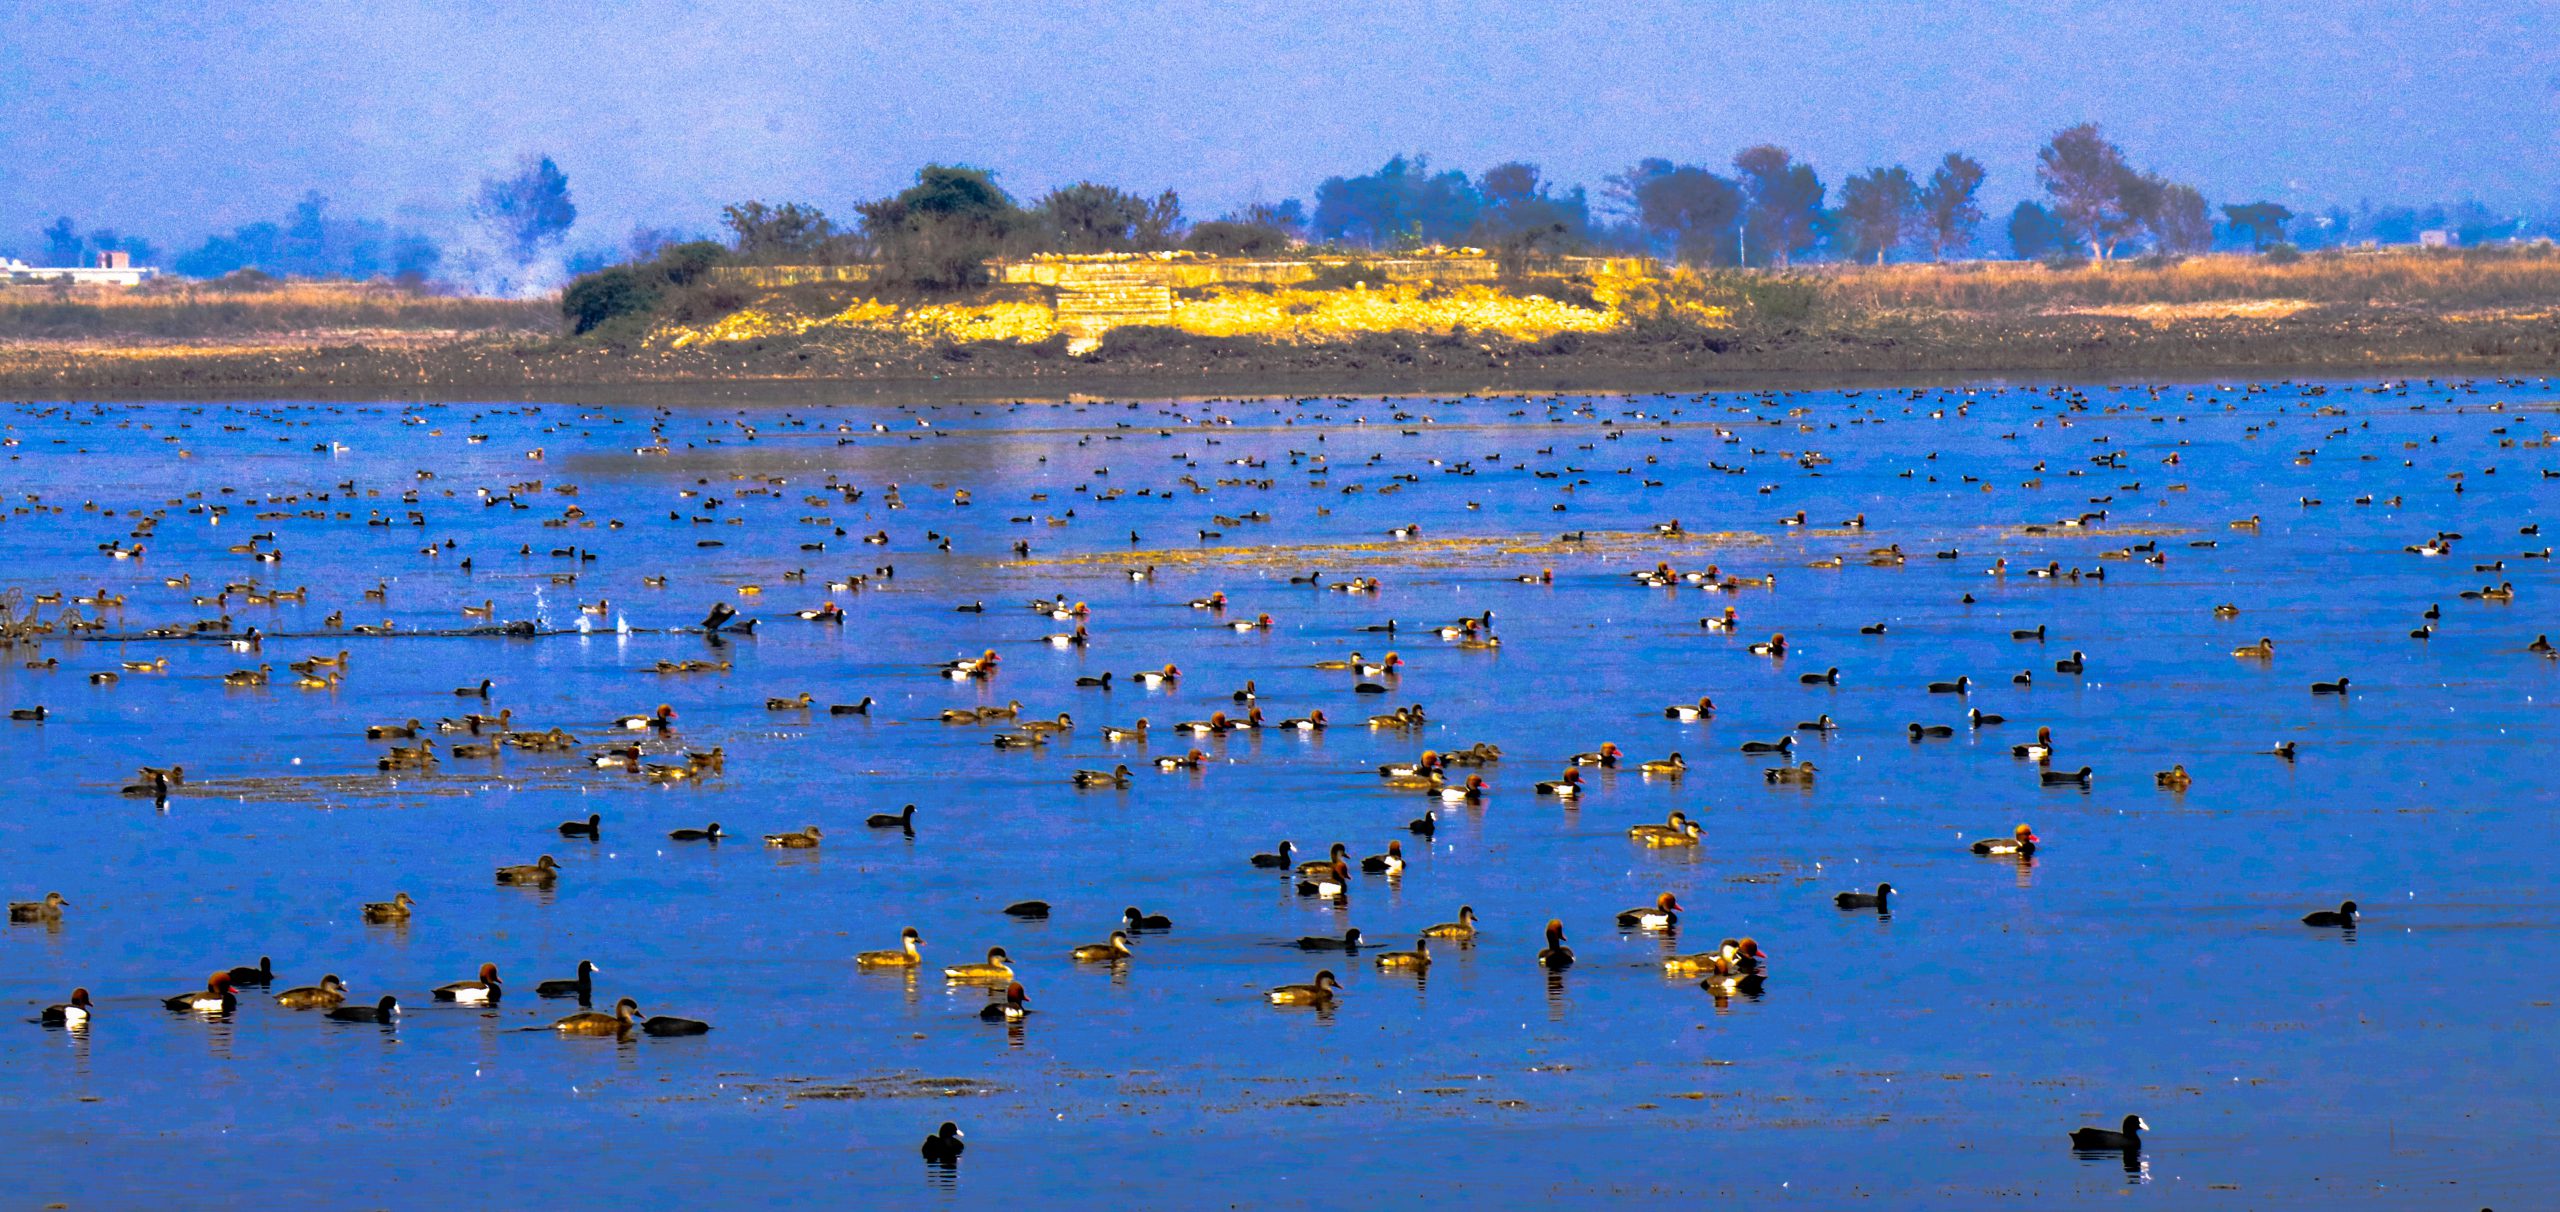 <p>Jagdishpur lake, full of birds, is the largest water body hosting different species in Nepal [image by: Manoj Paudel]</p>